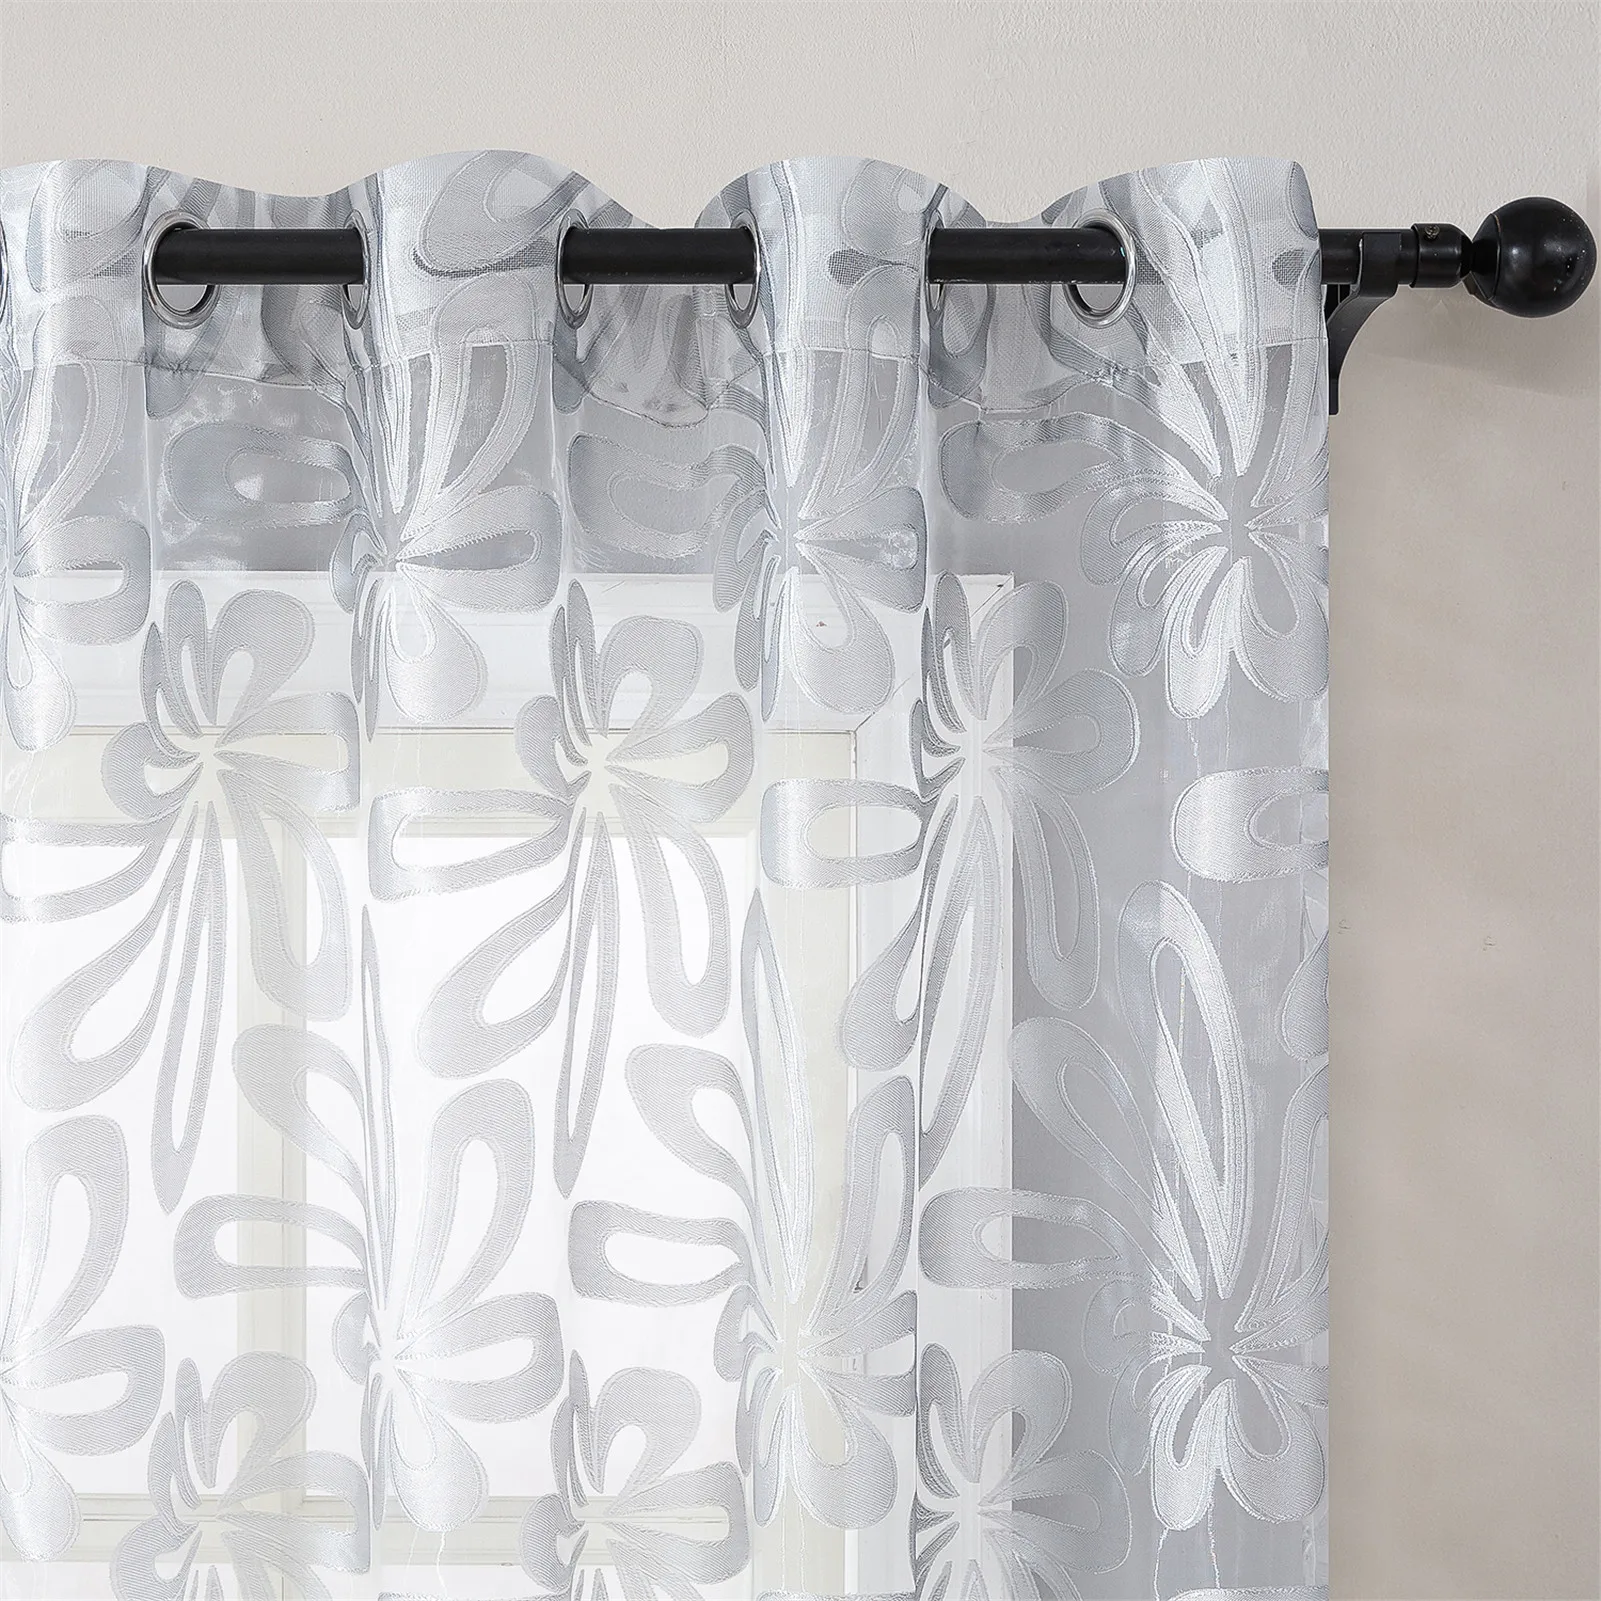 T curtains panels jacquard door curtains floral home decor sheer panel window treatment thumb200